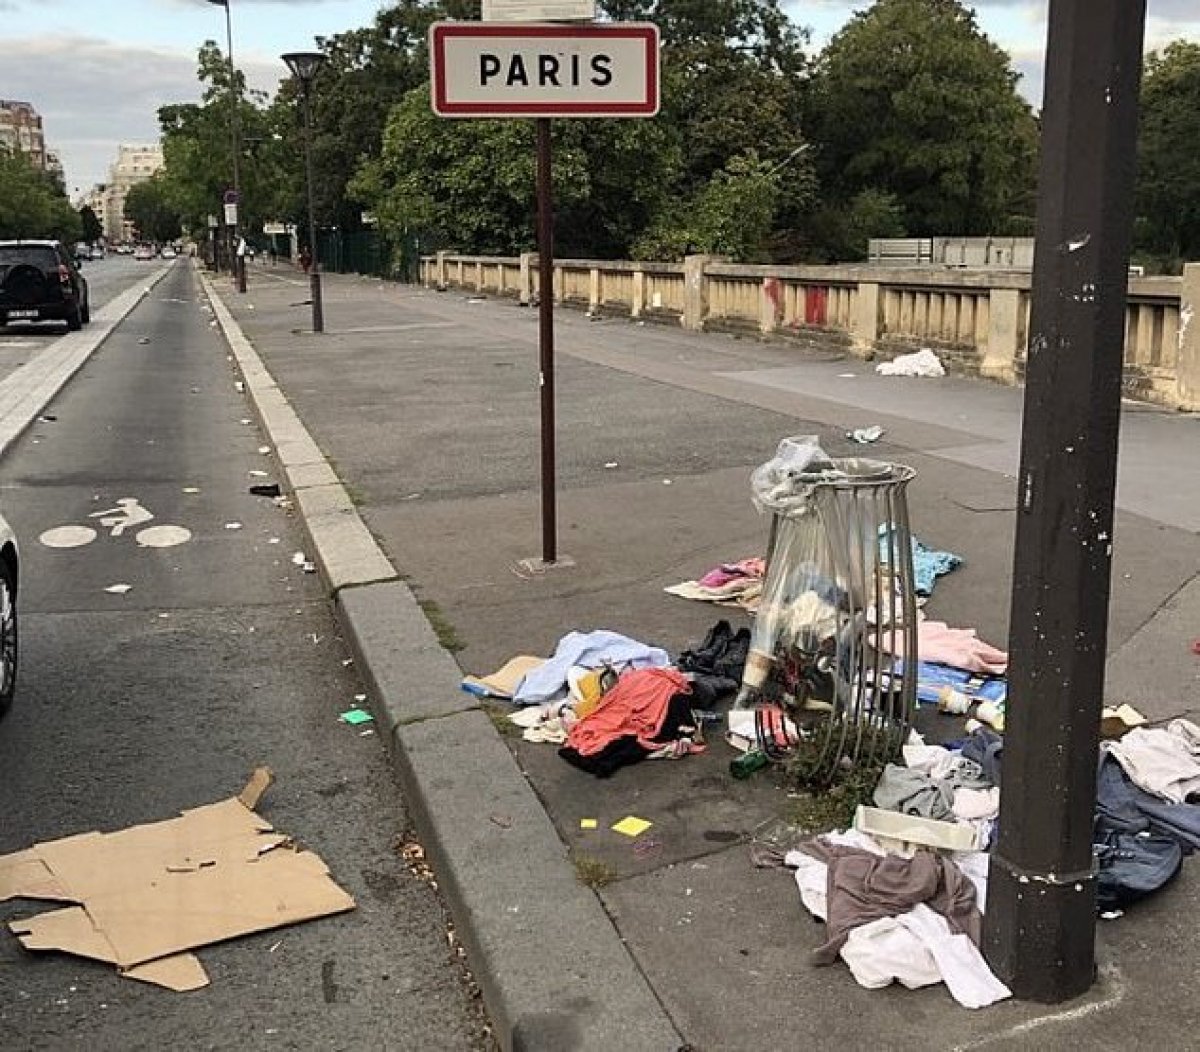 Paris streets filled with garbage #1